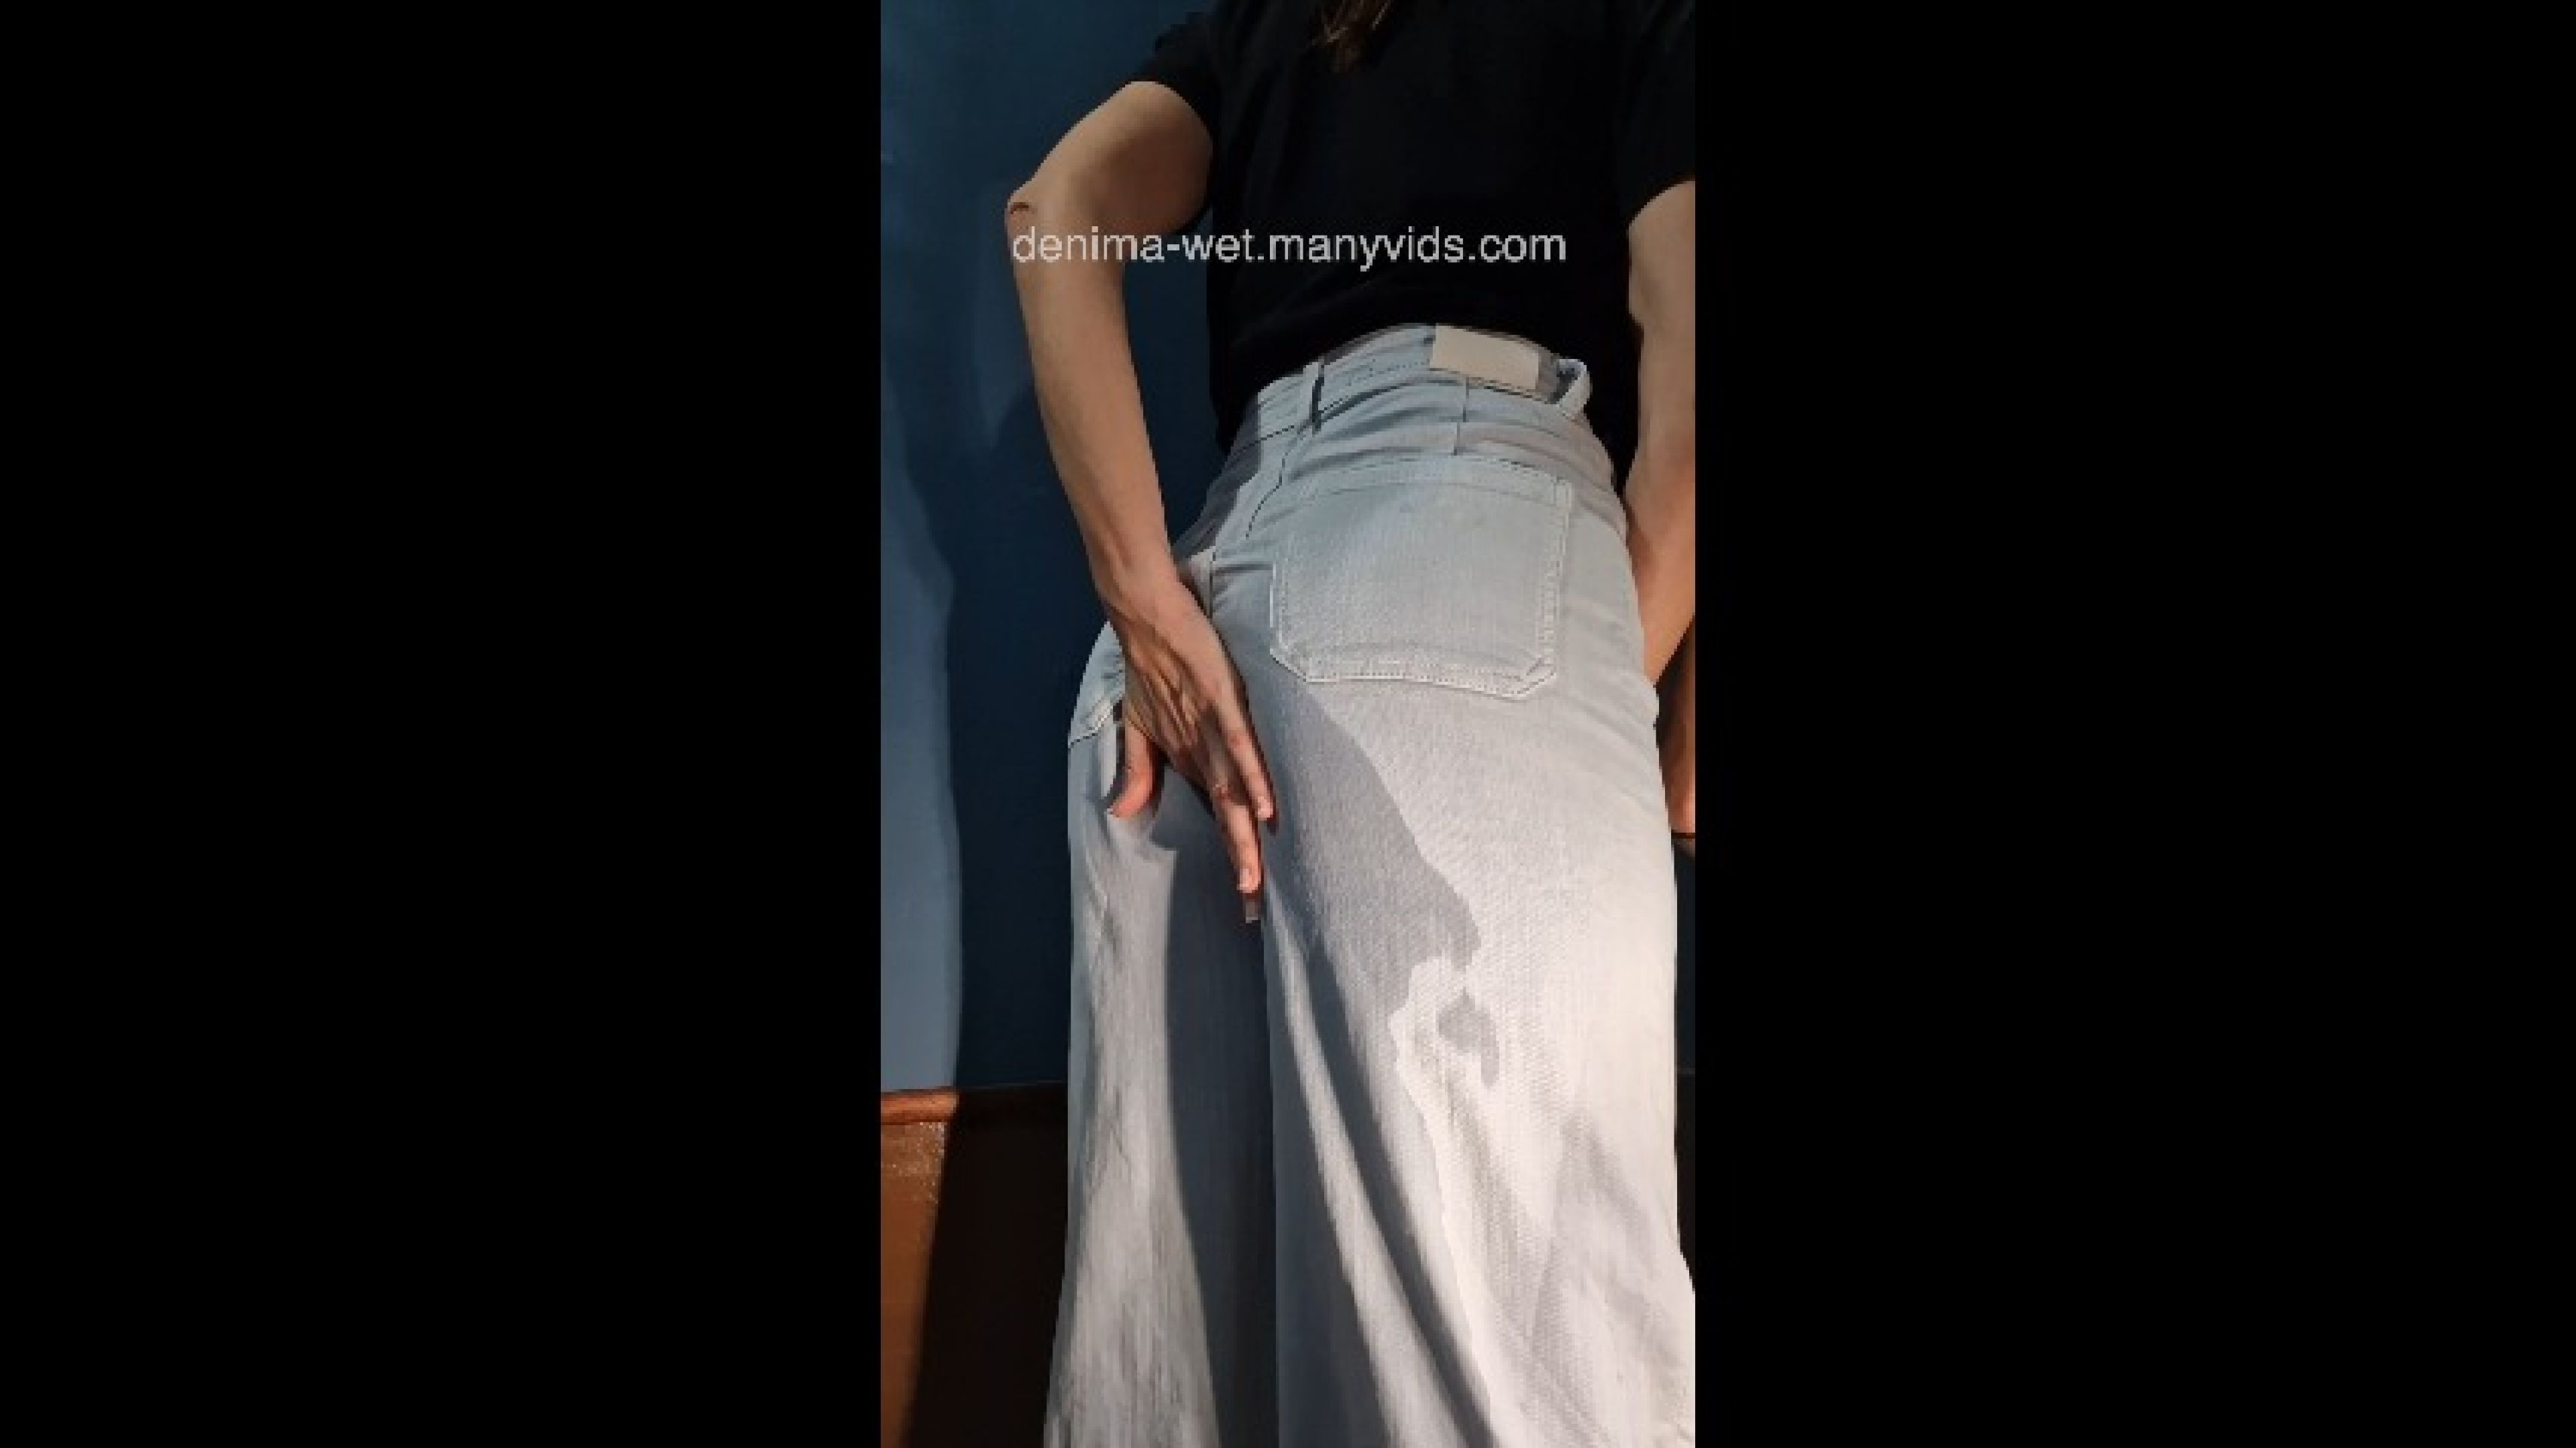 Re-wetting my summer jeans and touching myself